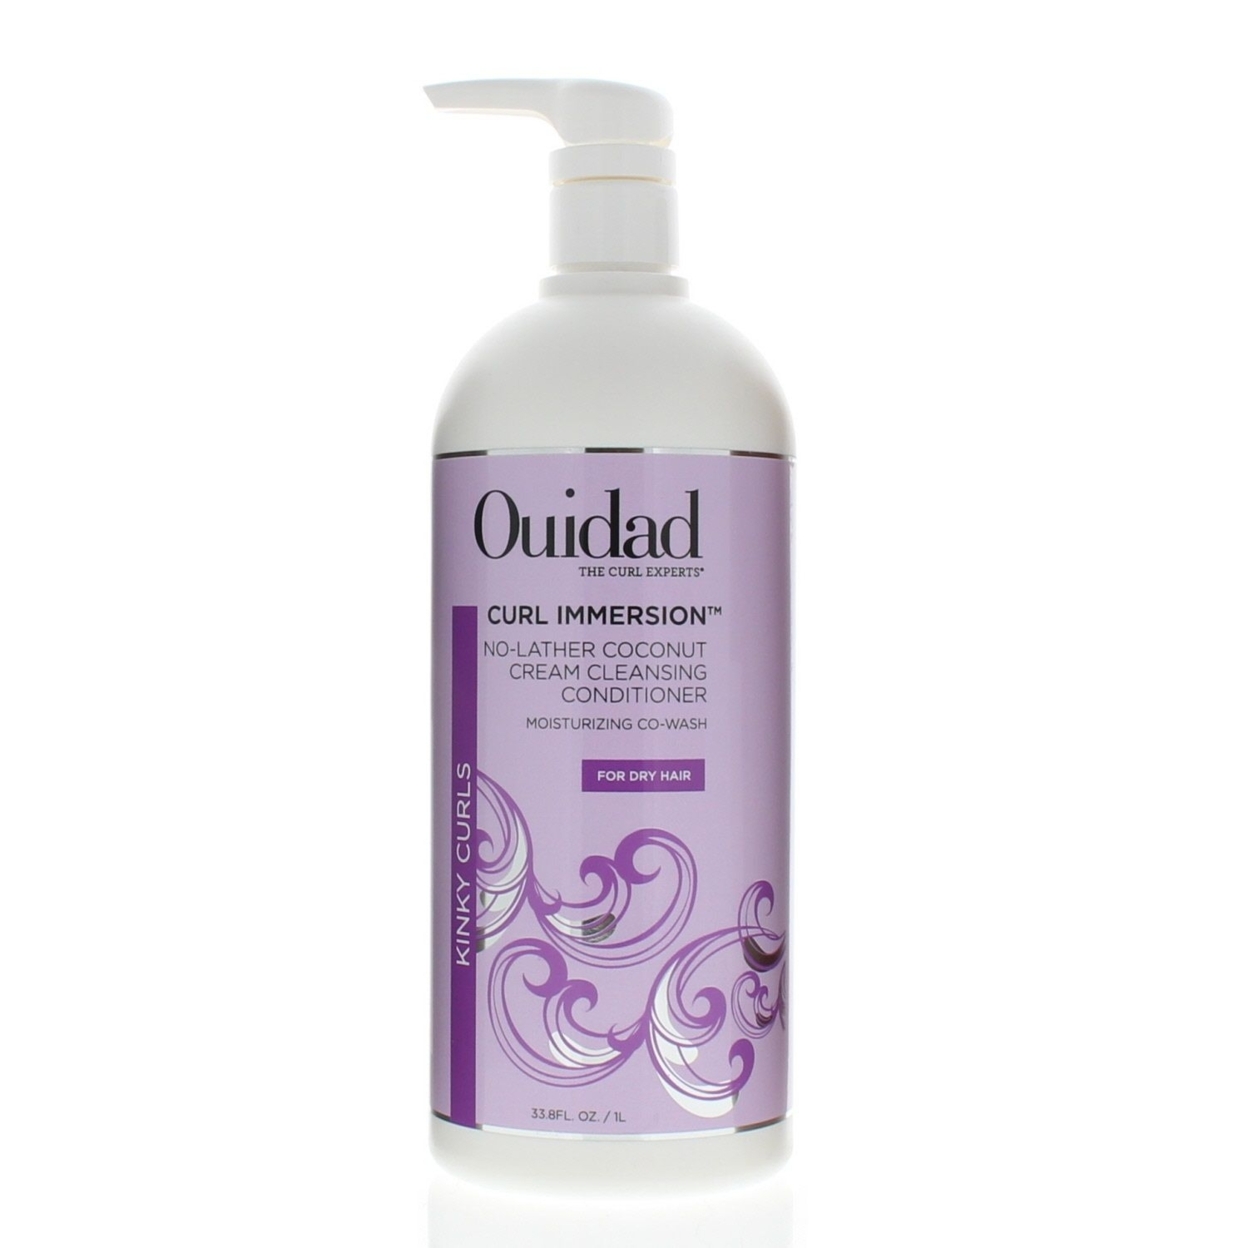 Ouidad Curl Immersion No-Lather Coconut Cream Cleansing Conditioner 33.8oz/1 Liter